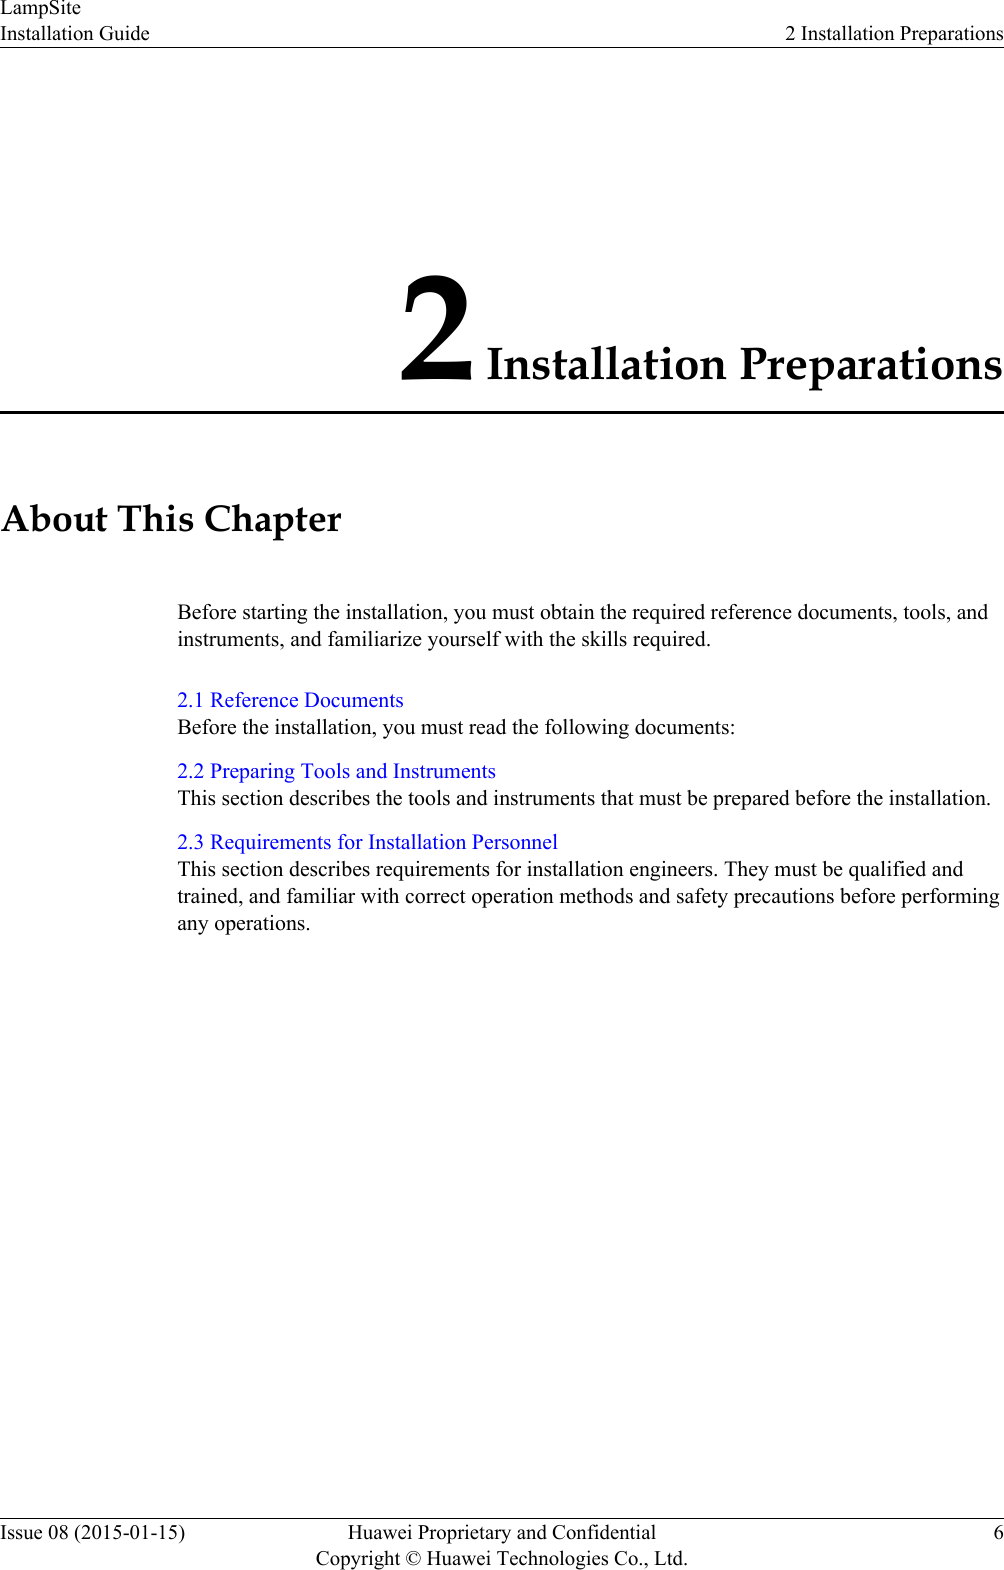 2 Installation PreparationsAbout This ChapterBefore starting the installation, you must obtain the required reference documents, tools, andinstruments, and familiarize yourself with the skills required.2.1 Reference DocumentsBefore the installation, you must read the following documents:2.2 Preparing Tools and InstrumentsThis section describes the tools and instruments that must be prepared before the installation.2.3 Requirements for Installation PersonnelThis section describes requirements for installation engineers. They must be qualified andtrained, and familiar with correct operation methods and safety precautions before performingany operations.LampSiteInstallation Guide 2 Installation PreparationsIssue 08 (2015-01-15) Huawei Proprietary and ConfidentialCopyright © Huawei Technologies Co., Ltd.6